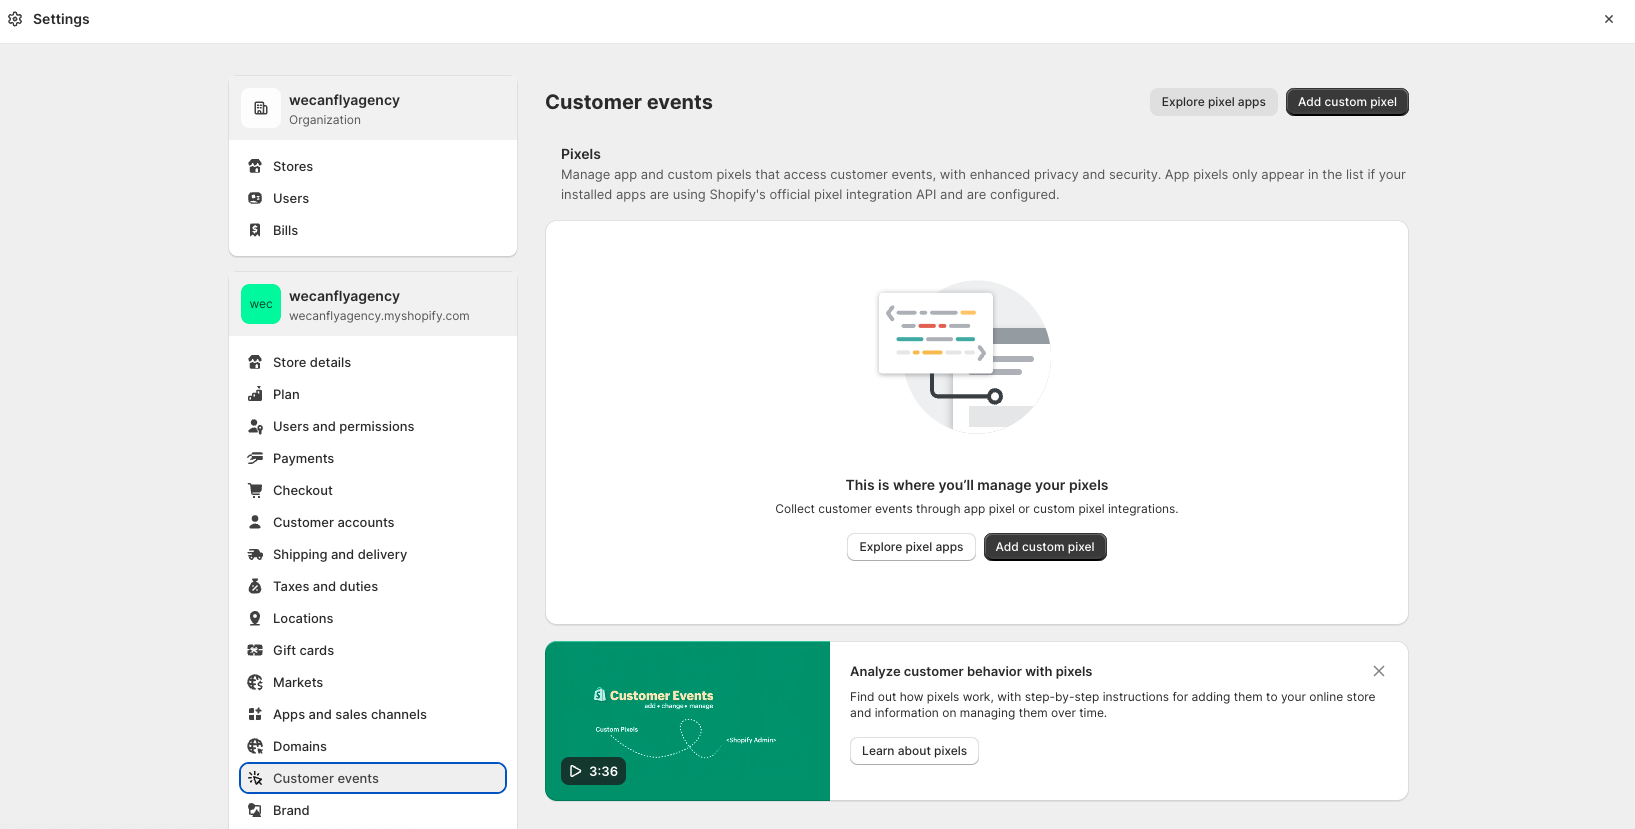 shopify pixel manager feature included with checkout extensibility